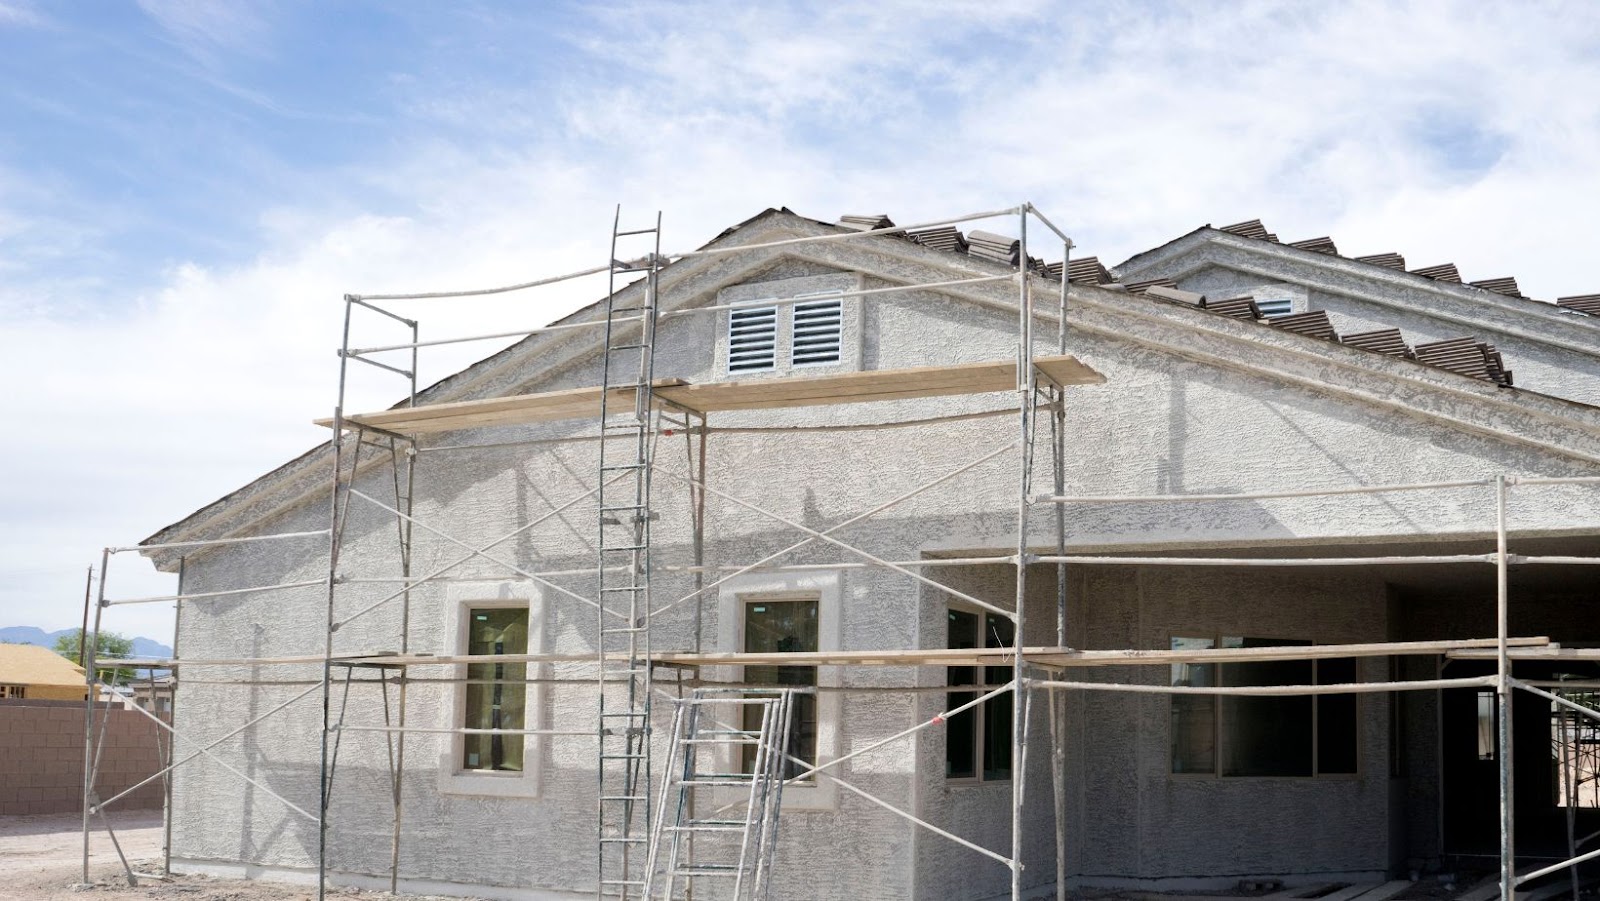 The Differences Between Brick Construction And Stucco